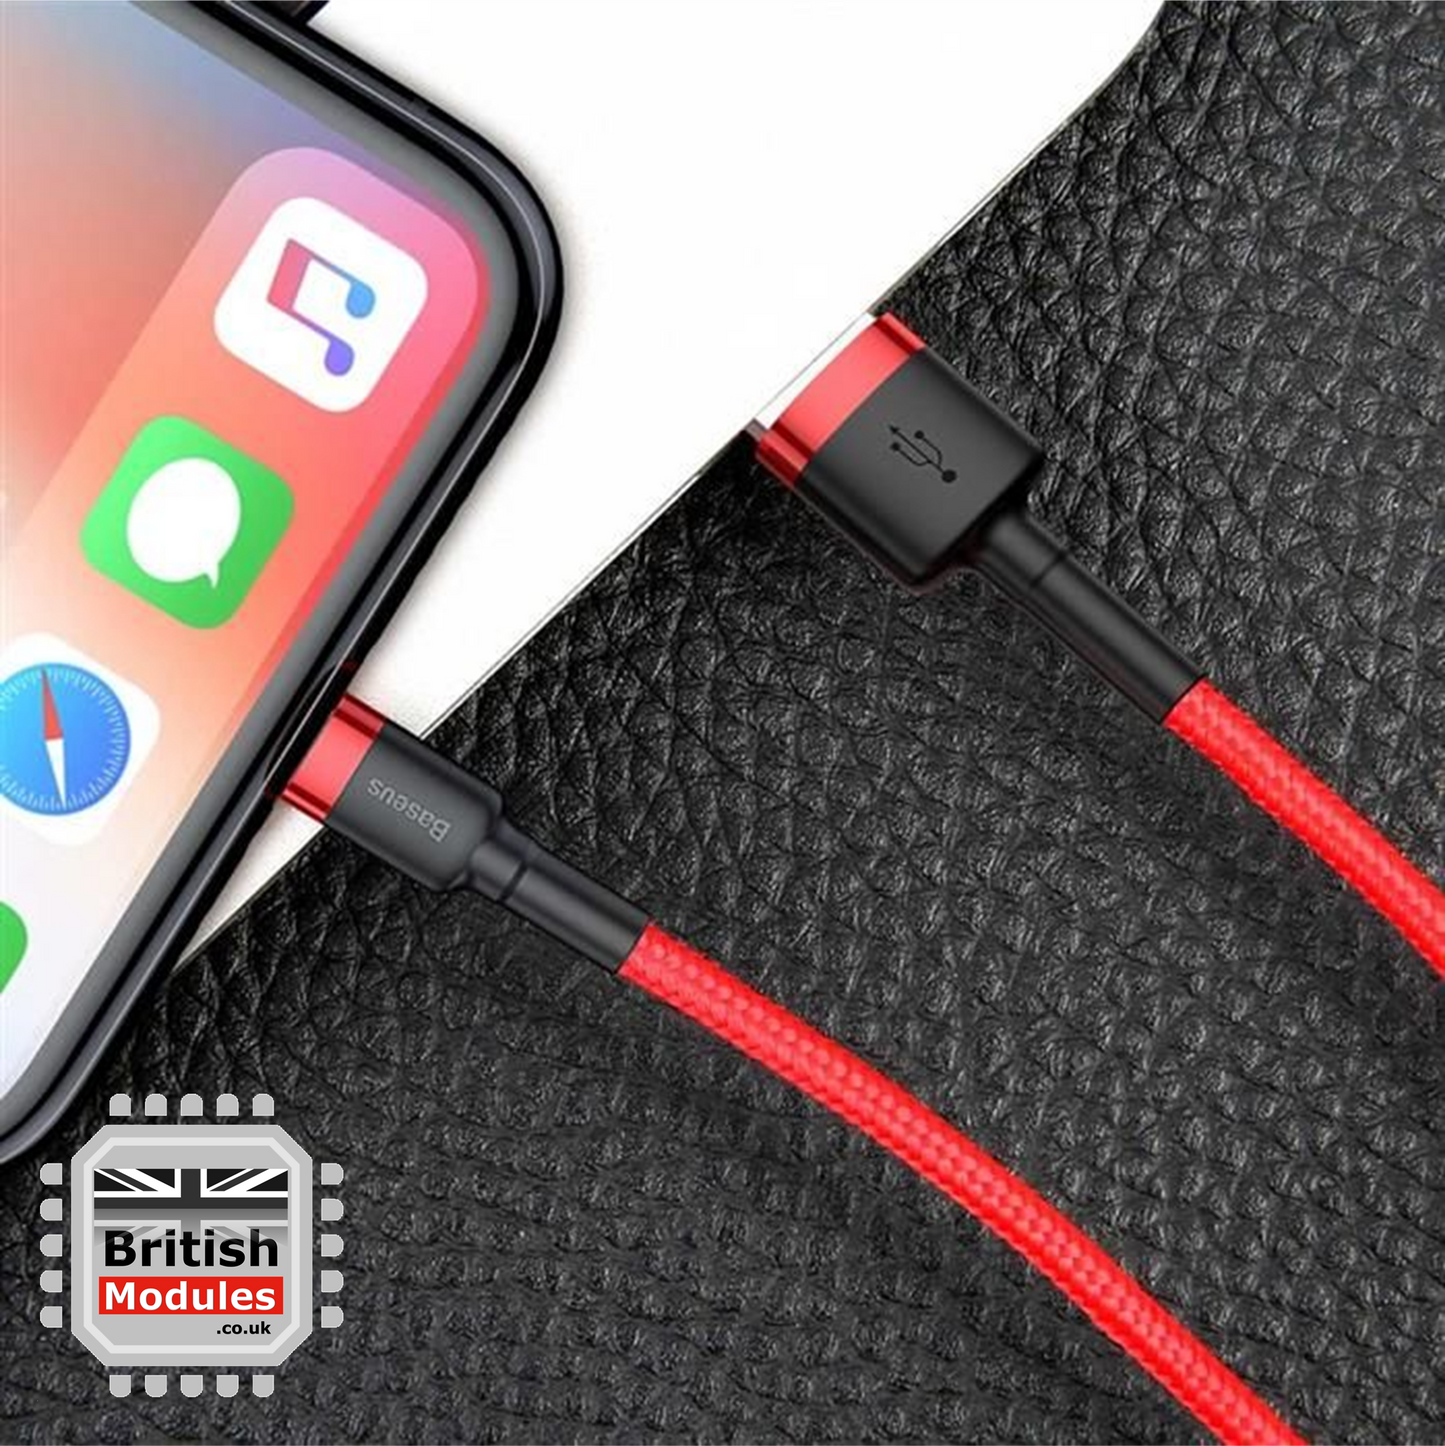 2M Heavy Duty Braided iPhone Lightning Cable 2.4A Fast Charging USB Data Cord for iPhone X, XS, XR, XS Max by Baseus Mix